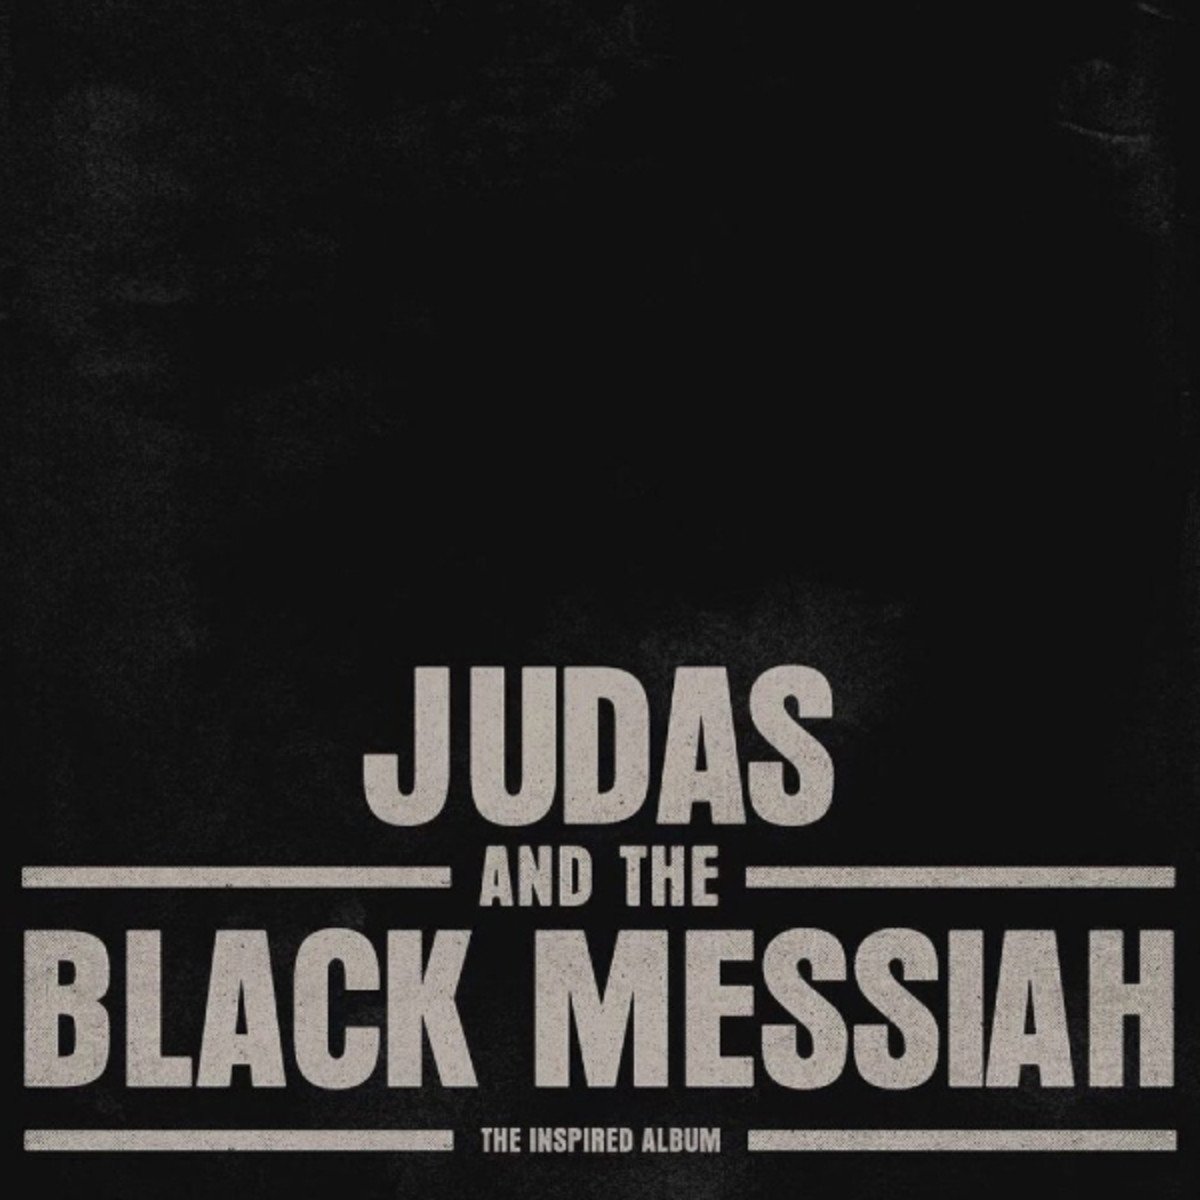 Stream ‘Judas and the Black Messiah: The Inspired Album’ f/ Jay-Z, ASAP Rocky, Nipsey Hussle, and More